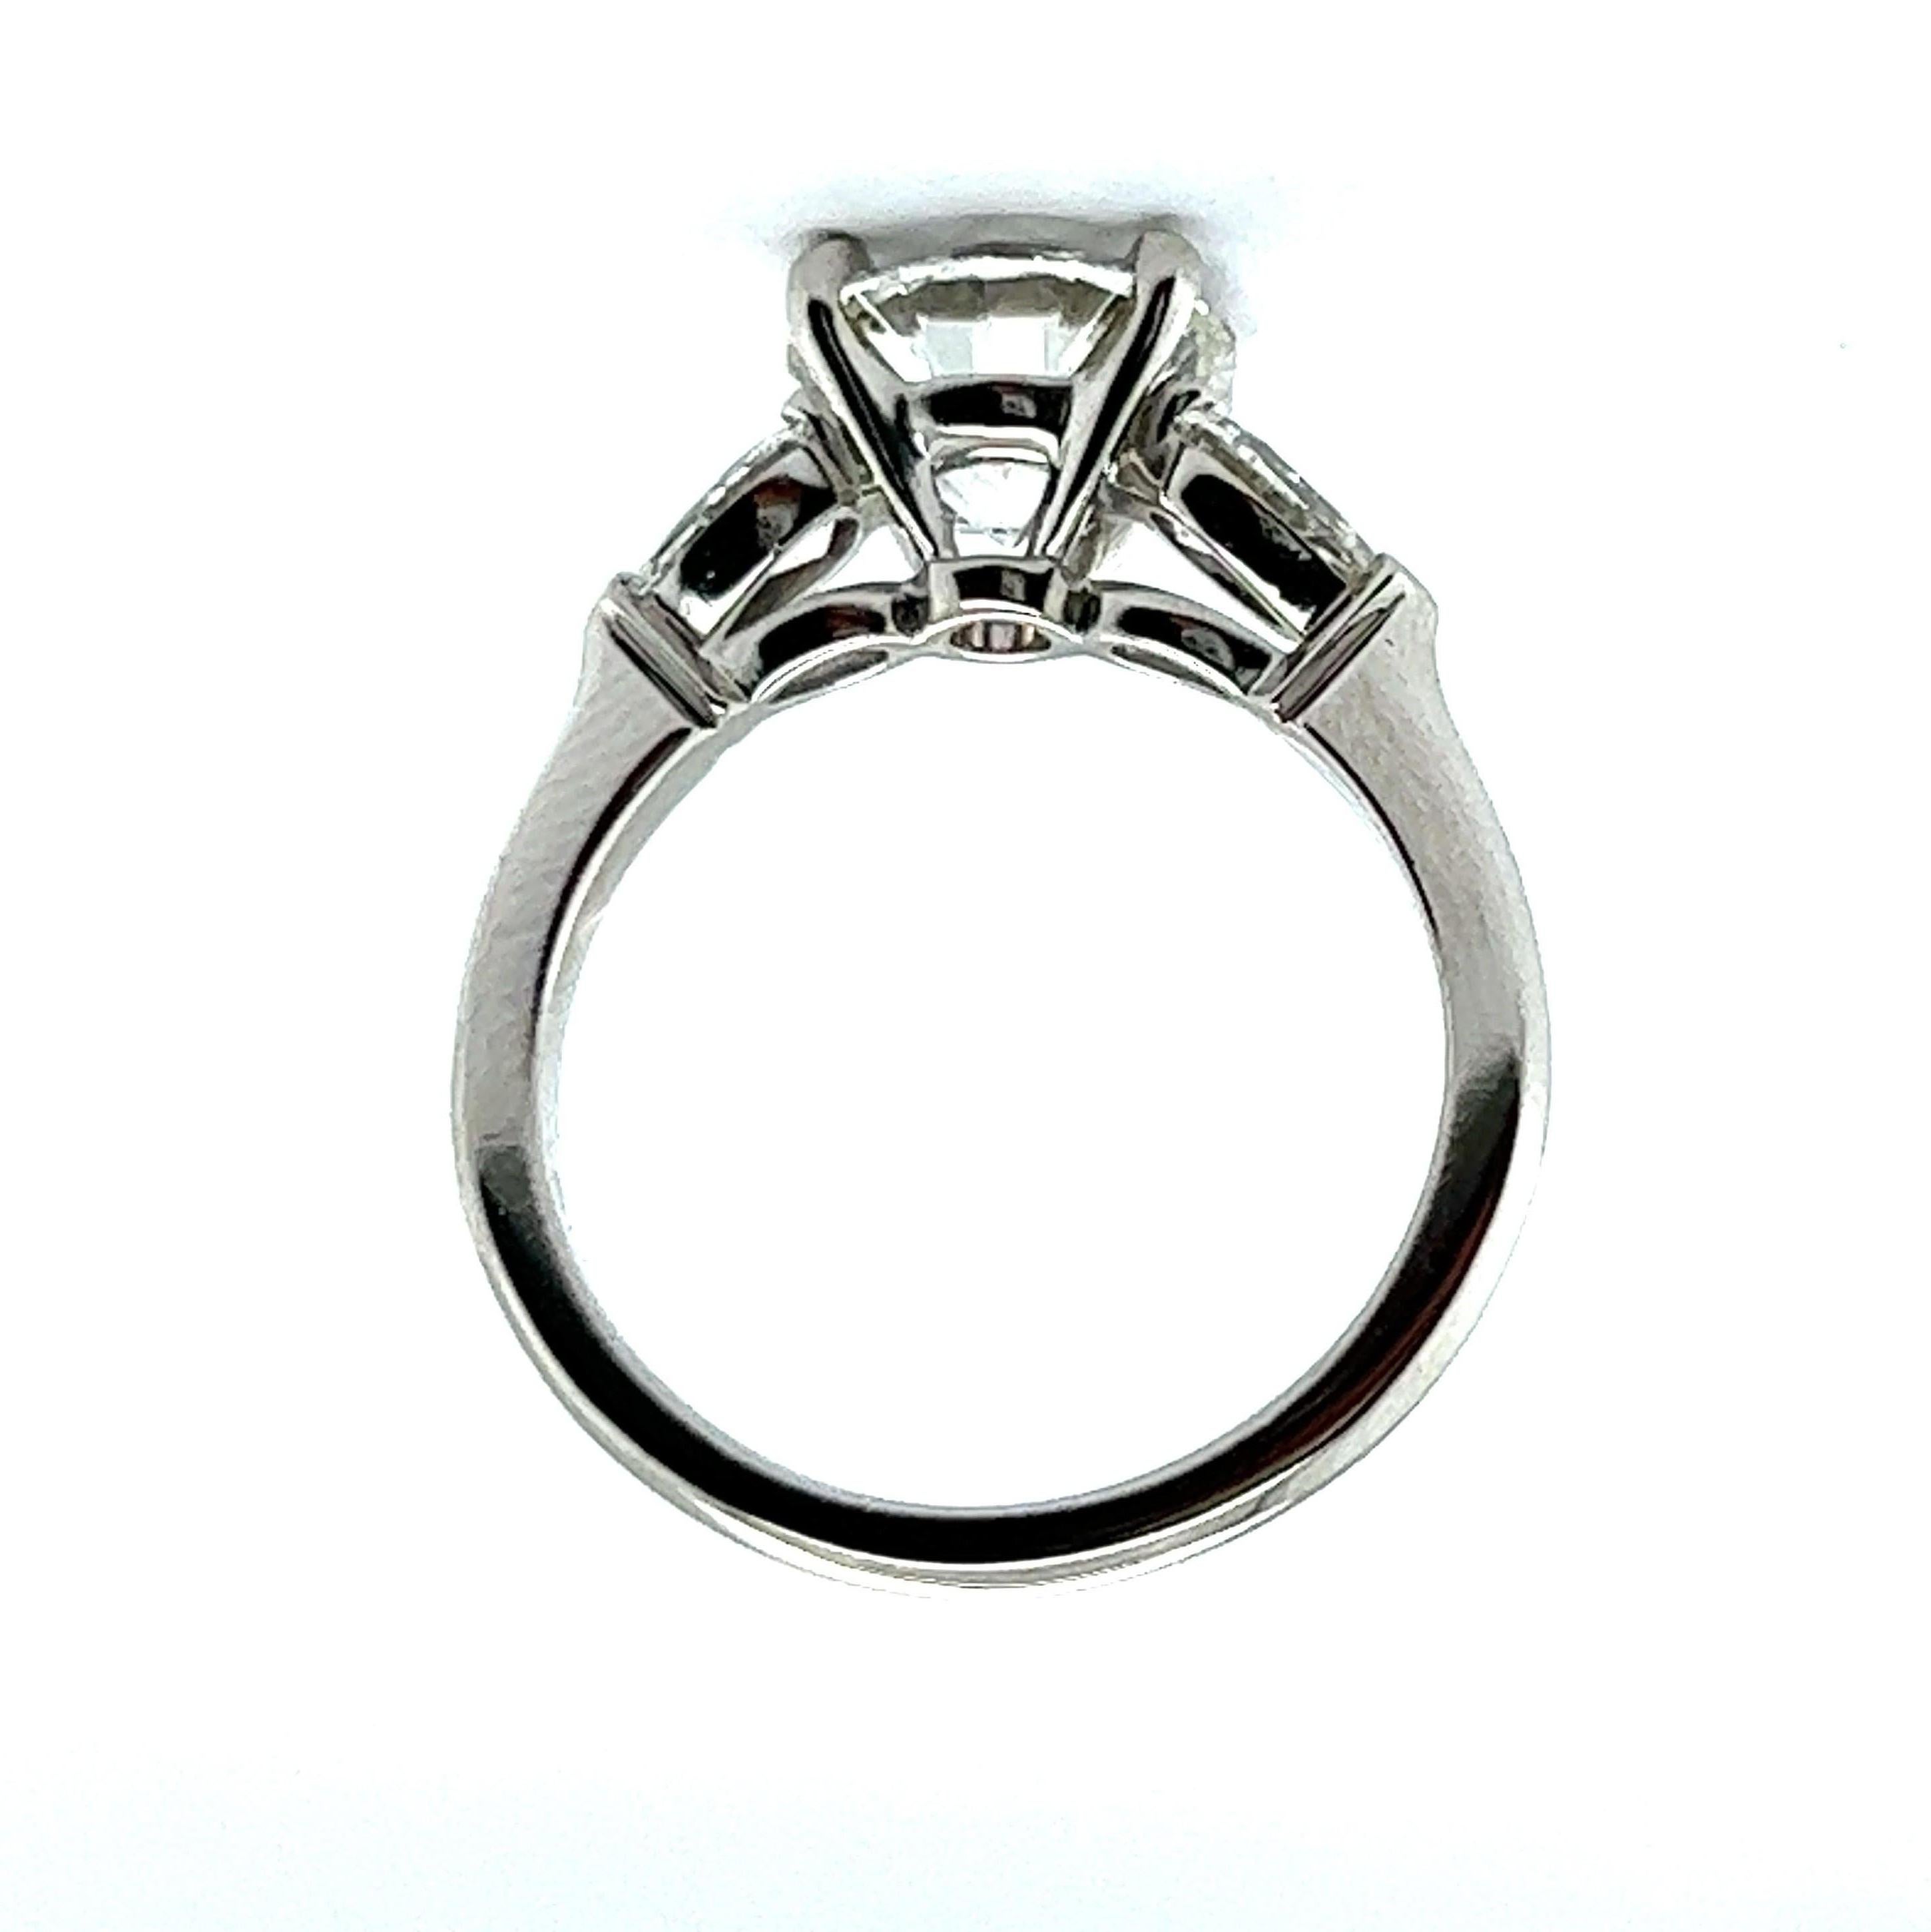 Women's or Men's Exceptional 2.34 Carat GIA Certified Diamond Ring in Platinum by Graff For Sale